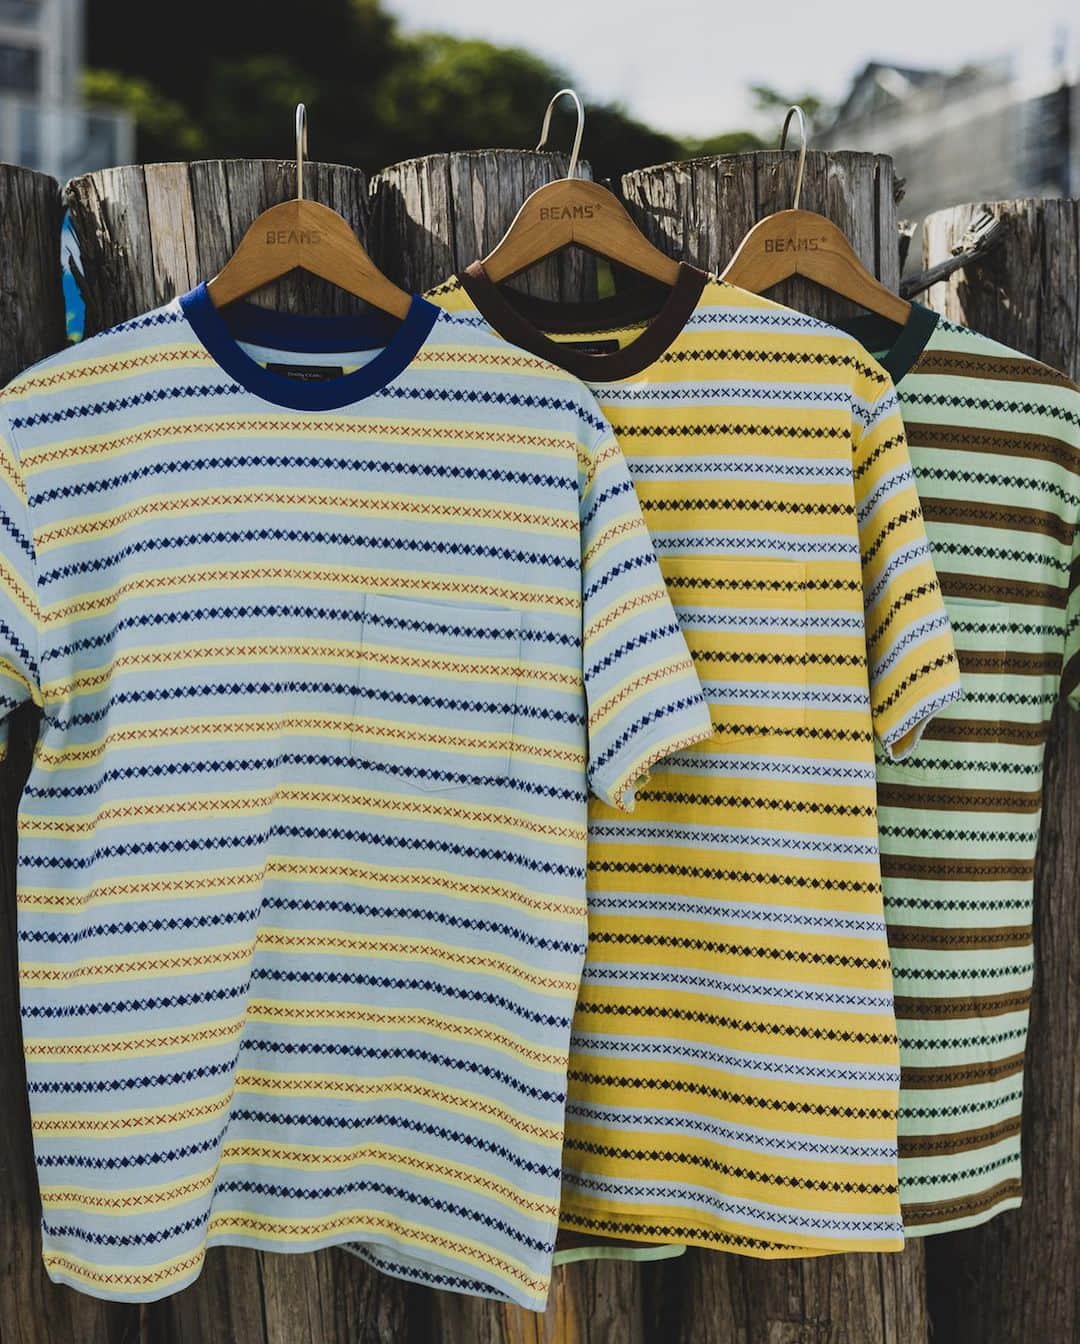 BEAMS+さんのインスタグラム写真 - (BEAMS+Instagram)「... Hope you love the laid-back vibe of BEAMS PLUS classic beachwear! ---------- ●Pocket Tee Pile Stripe A comfy T-shirt with a cool striped design, perfect for the beach. It's made from a mix of cotton and polyester for a soft feel.  ●Pocket Tee Jacquard Stripe This tee draws inspiration from vintage styles and features a unique jacquard stripe pattern created with special yarn.  ●B.D. Double Gauze Enjoy the breezy and soft feel of this gauze material, which has a lovely textured finish.  ●MIL 1 Pleat Athletic Shorts These shorts are designed with a touch of vintage charm, made from smooth nylon taffeta, and inspired by U.S. Navy swim shorts.  快適な着心地と洗練されたスタイル、BEAMS PLUSのクラシックなビーチウェア。 ---------- ● Pocket Tee Pile Stripe 海が似合うパイル素材とストライプ。コットンとポリエステルの混紡生地を使用。パイル地のループ長を短く設定し、パイル特有の重みを軽減。肌触りと着心地を考えたパイルTシャツ。  ● Pocket Tee Jacquard Stripe ビンテージ Tシャツから着想し、オリジナルで編み立てたジャカードストライプ。40番双糸を使い、4色の先染め糸で編みあげています。  ● B.D. Double Gauze 柔らかで通気性に富むガーゼ素材。生地染めを行うことでふっくらとした風合いに仕上げています。   ● MIL 1 Pleat Athletic Shorts 50デニールナイロンタフタを使用。ヴィンテージ感のある微光沢のナイロンは、もちろんオリジナルファブリック。 U.S.NAVYのスイムショーツをベースにデザインしたモデルです。 . @beams_plus @beams_plus_harajuku @beams_plus_yurakucho #beamsplus」8月8日 20時02分 - beams_plus_harajuku